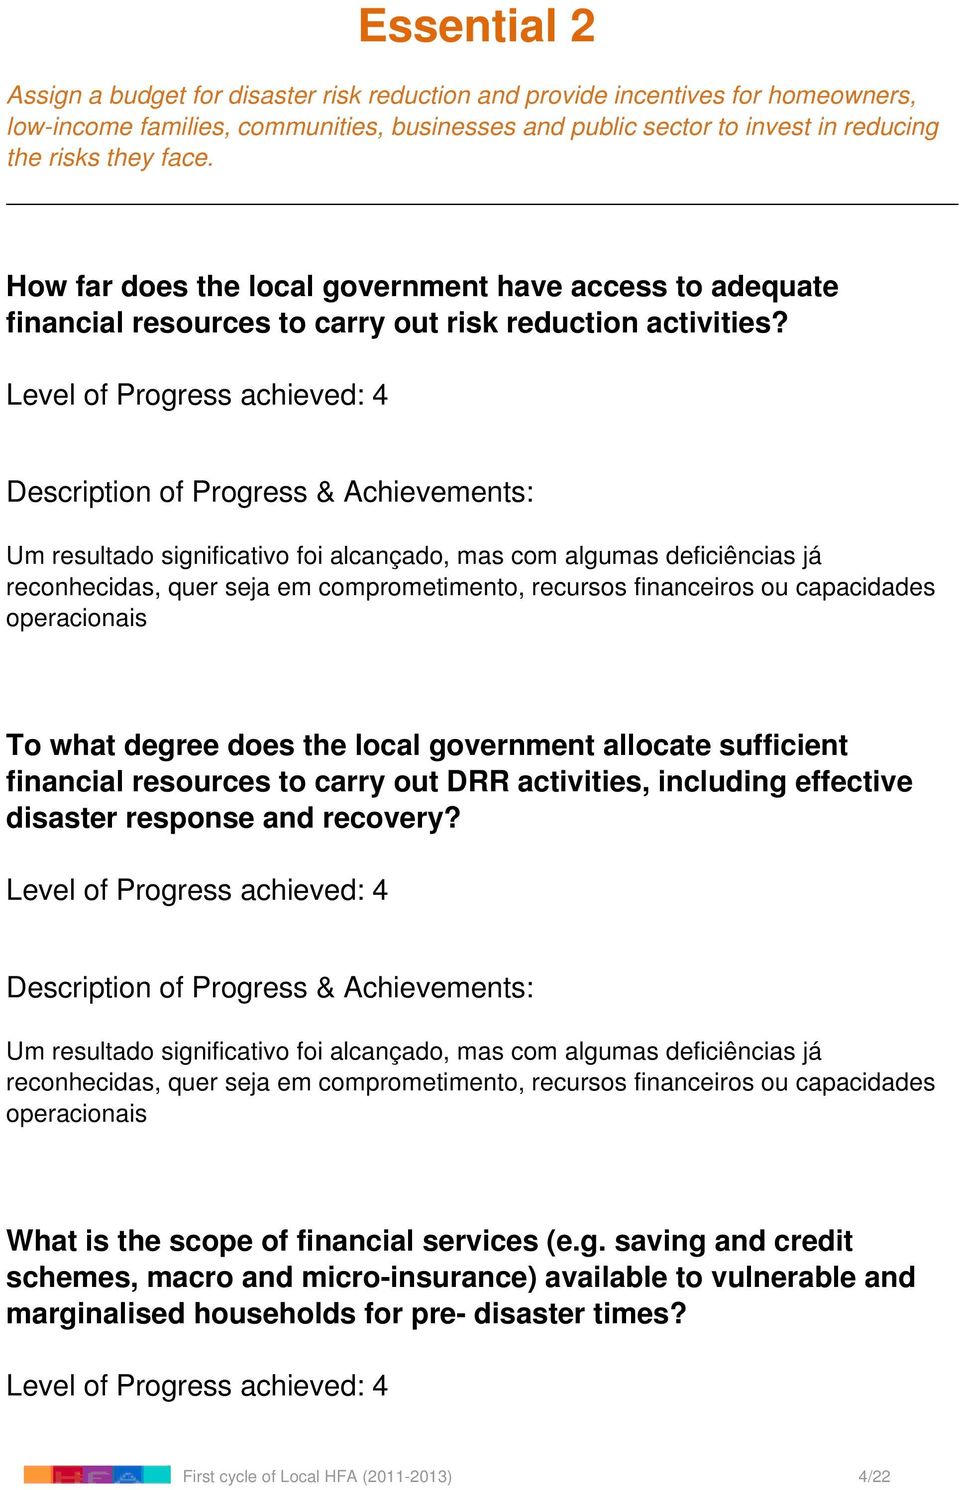 To what degree does the local government allocate sufficient financial resources to carry out DRR activities, including effective disaster response and recovery?